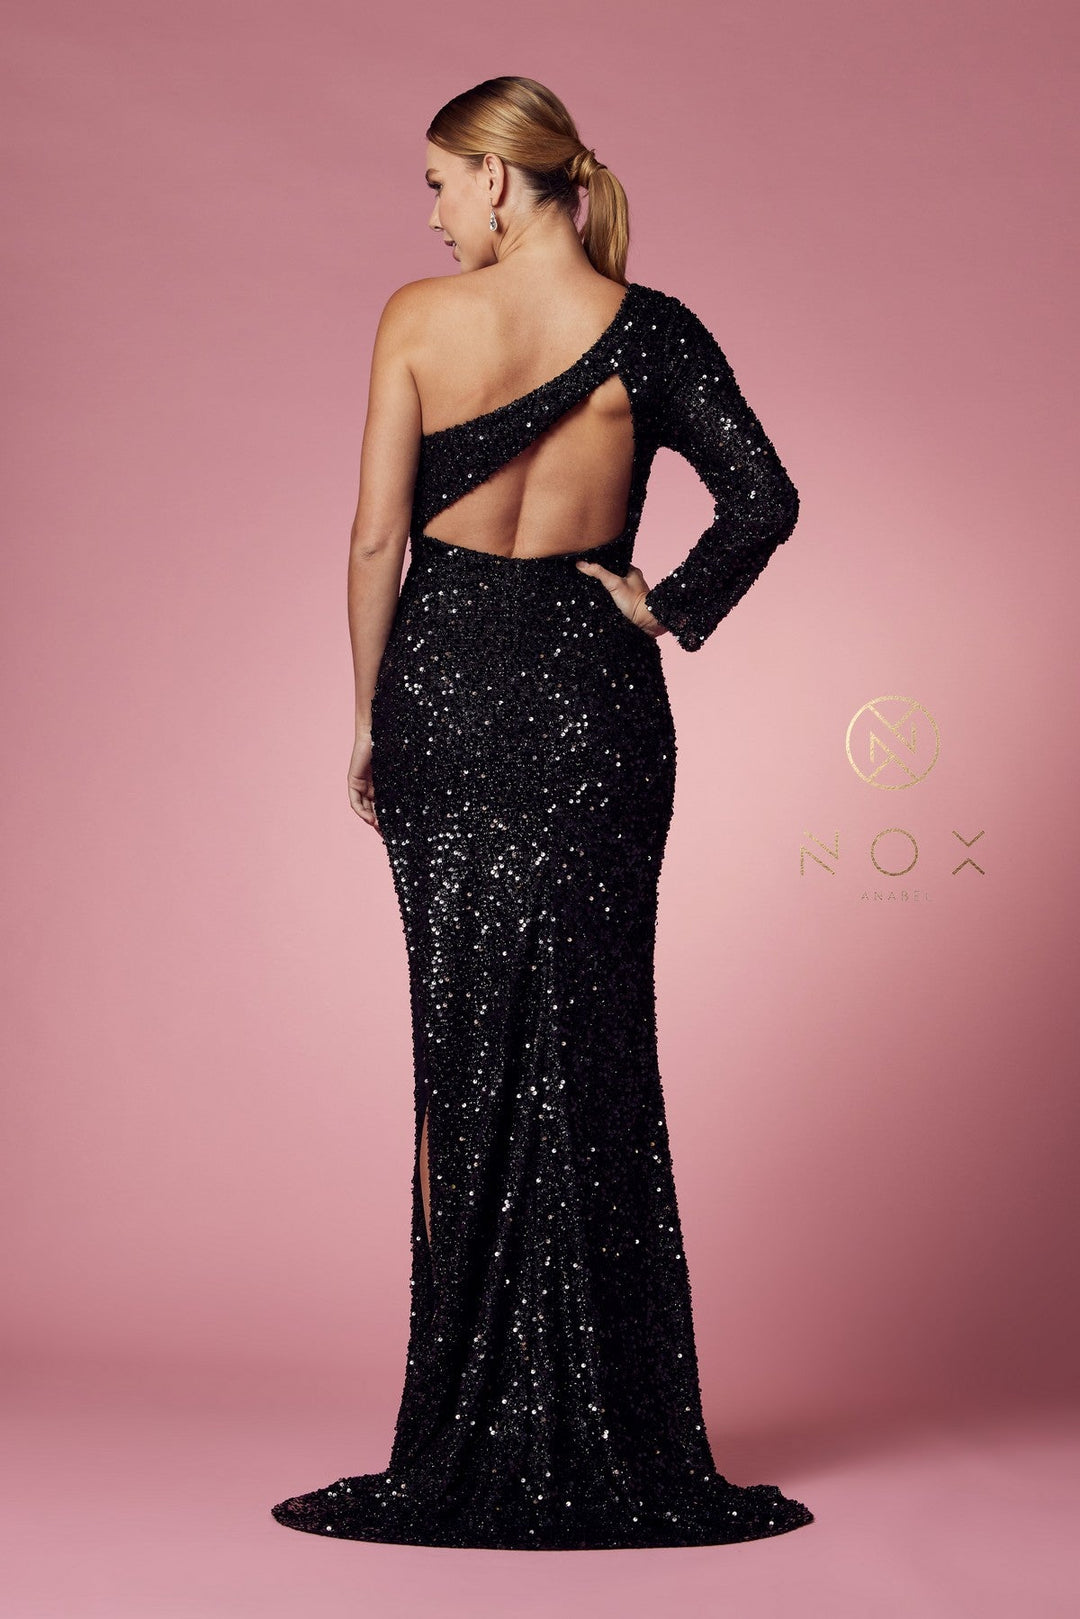 Fitted One Sleeve Sequin Gown by Nox Anabel S1013